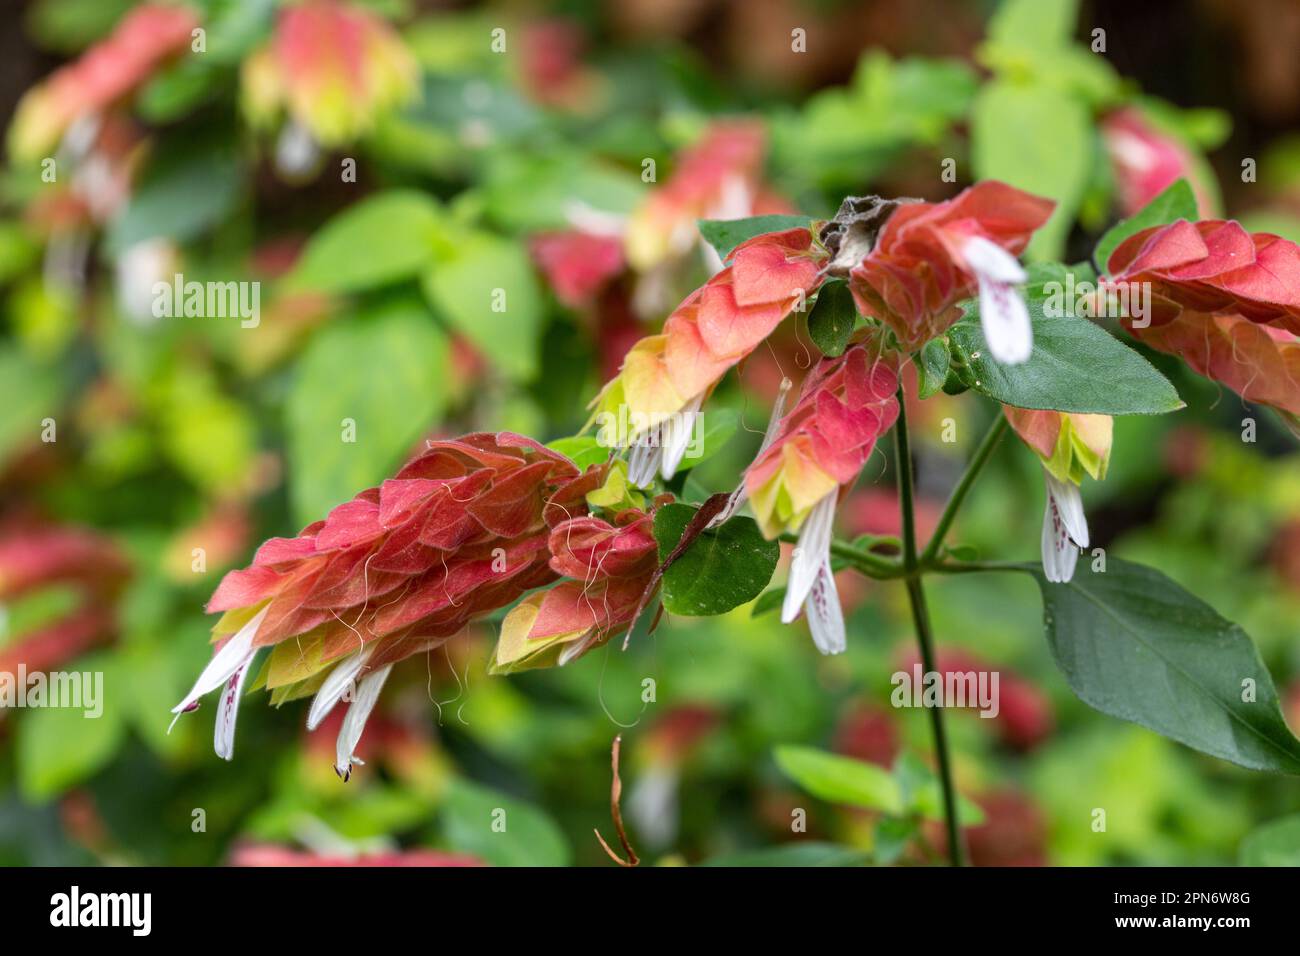 Justicia brandegeeana, also known as shrimp plant, is a tropical evergreen shrub with red to pink bracts and white flowers that resemble shrimps Stock Photo